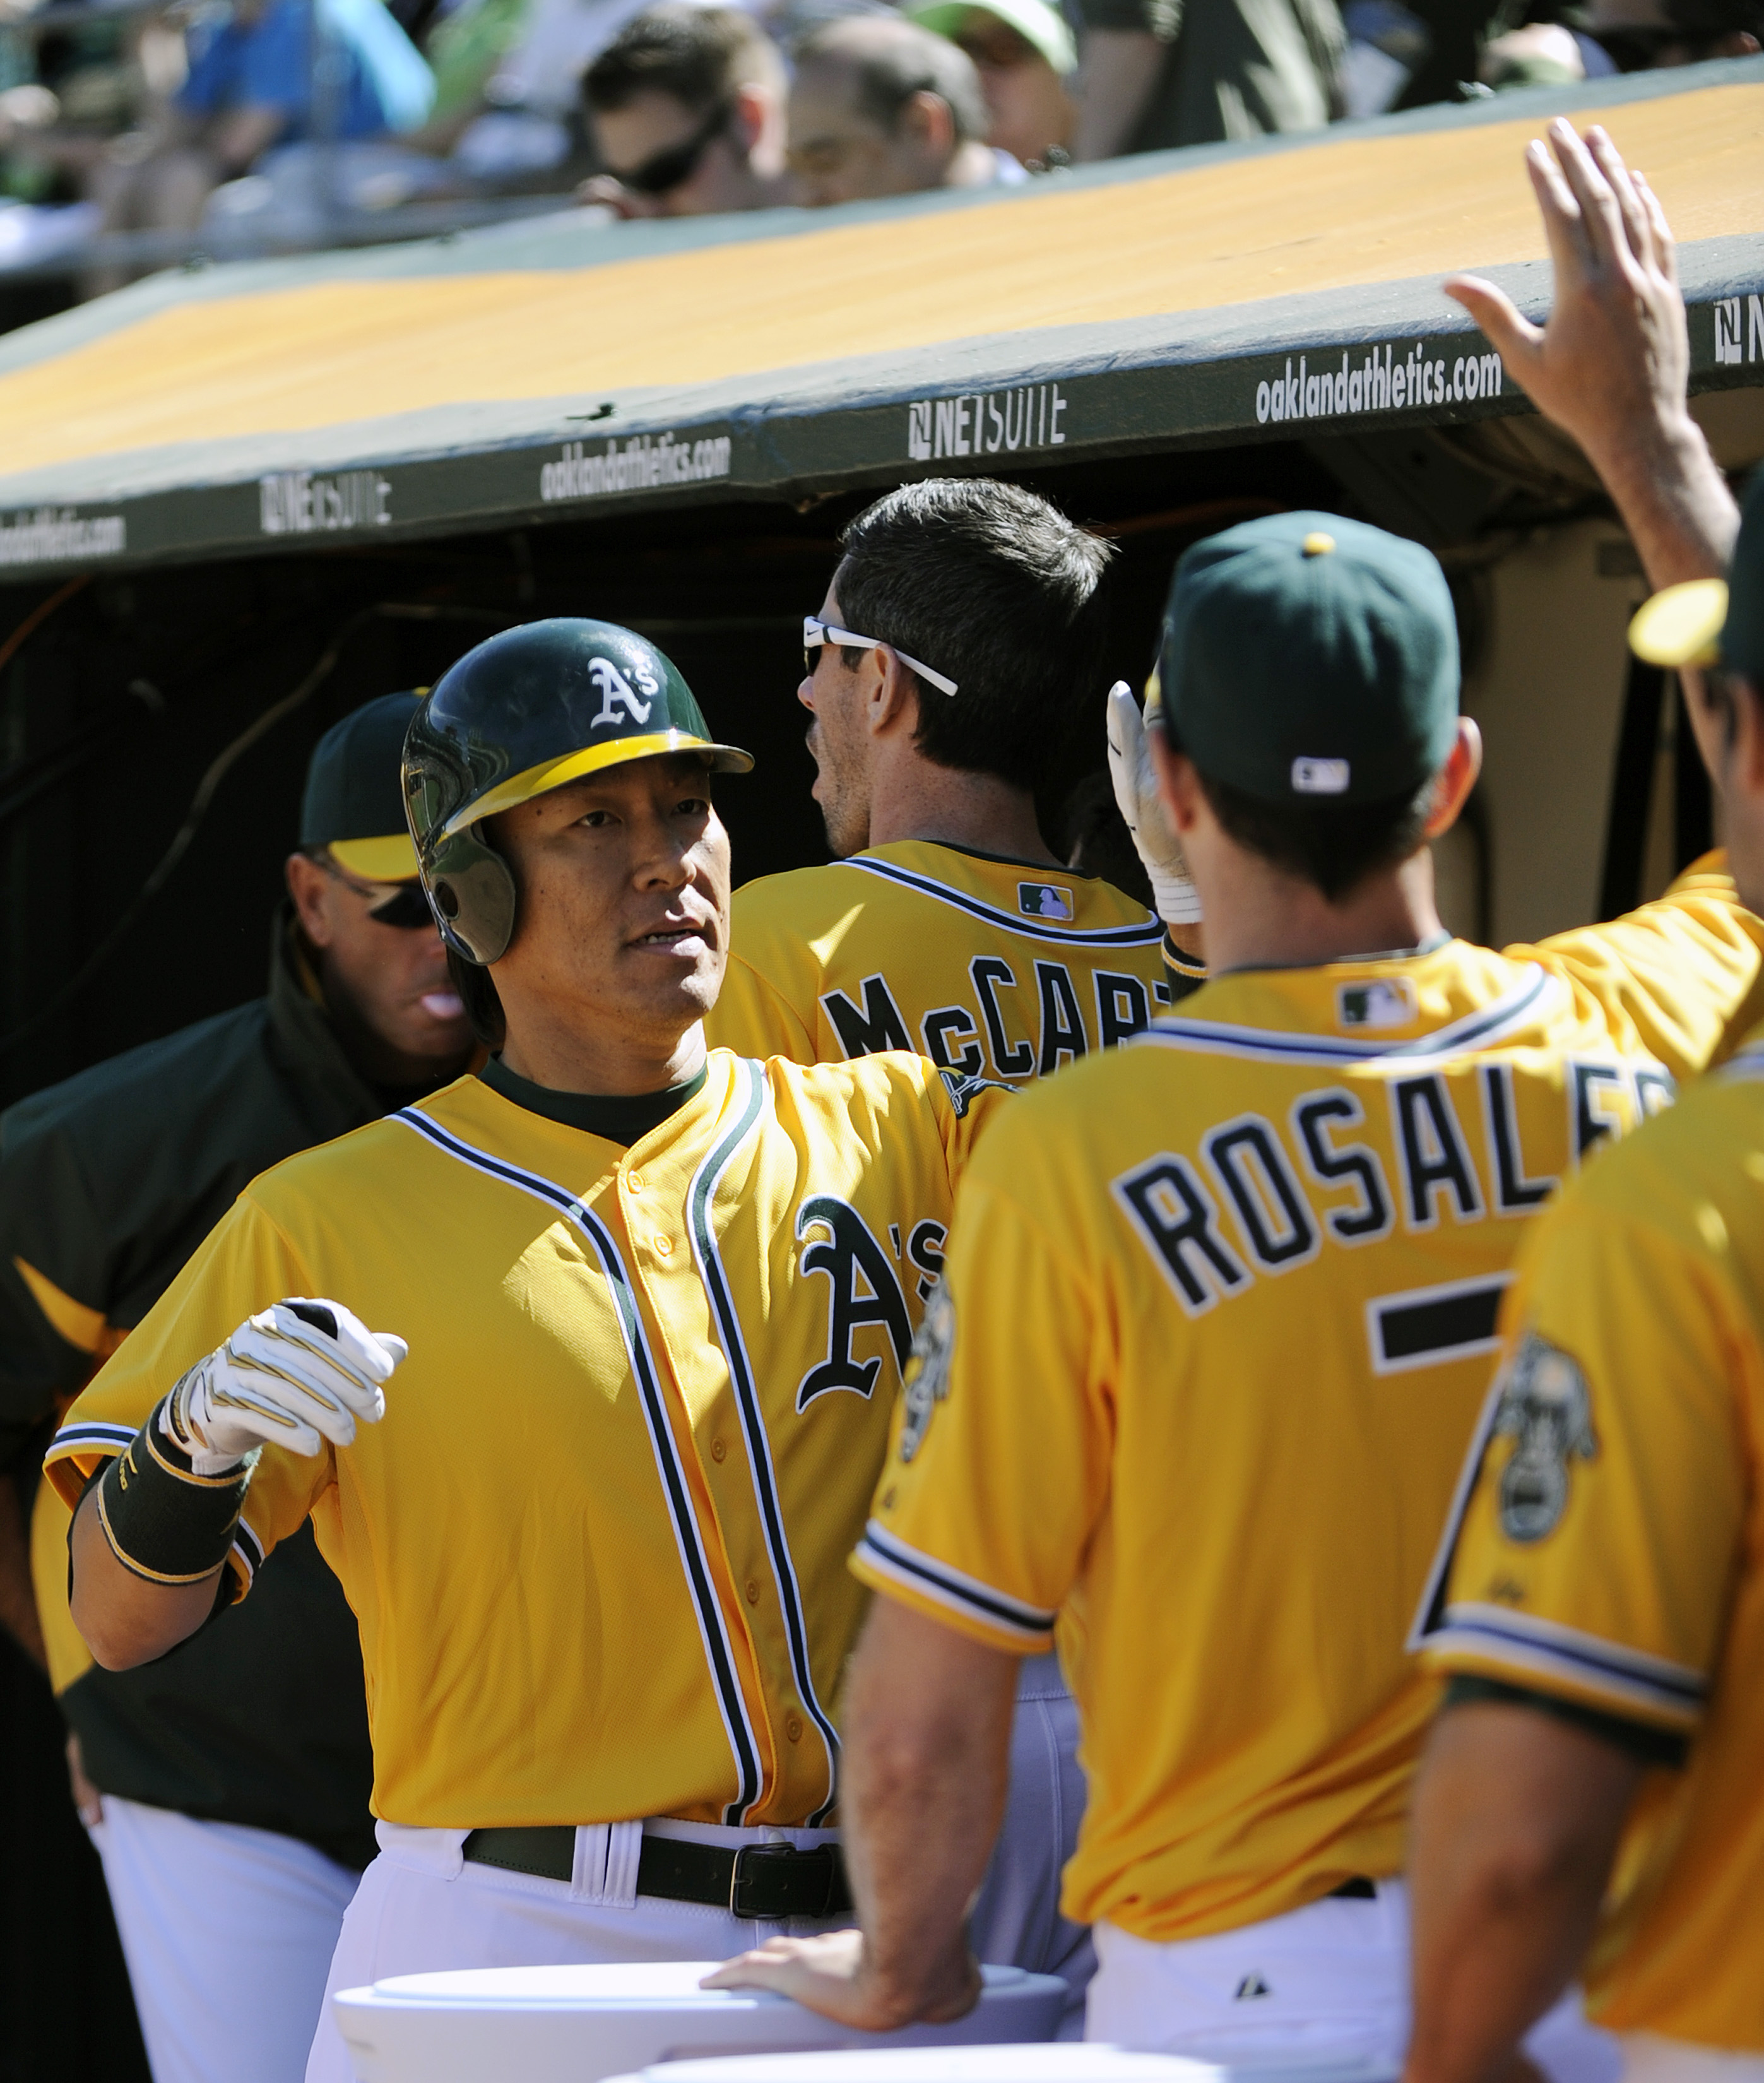 OAKLAND, CA - APRIL 3: Hideki Matsui #55 of the Oakland Athletics gets a high-fives from teammates in the dougout after scoring a run against the Seattle Mariners during a MLB baseball game at the Oakland-Alameda County Coliseum April 3, 2011 in Oakland, 